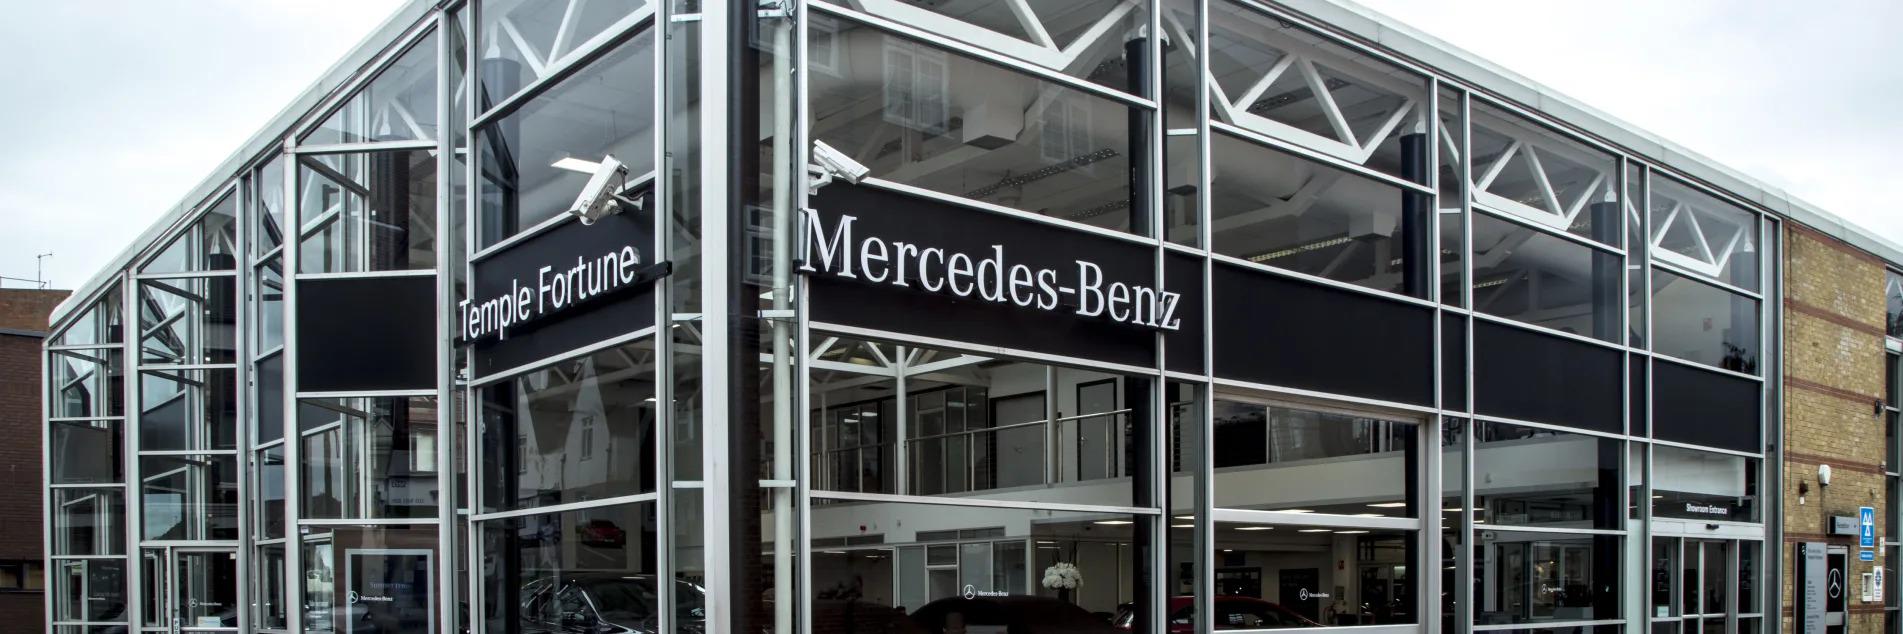 Images Mercedes-Benz of Temple Fortune